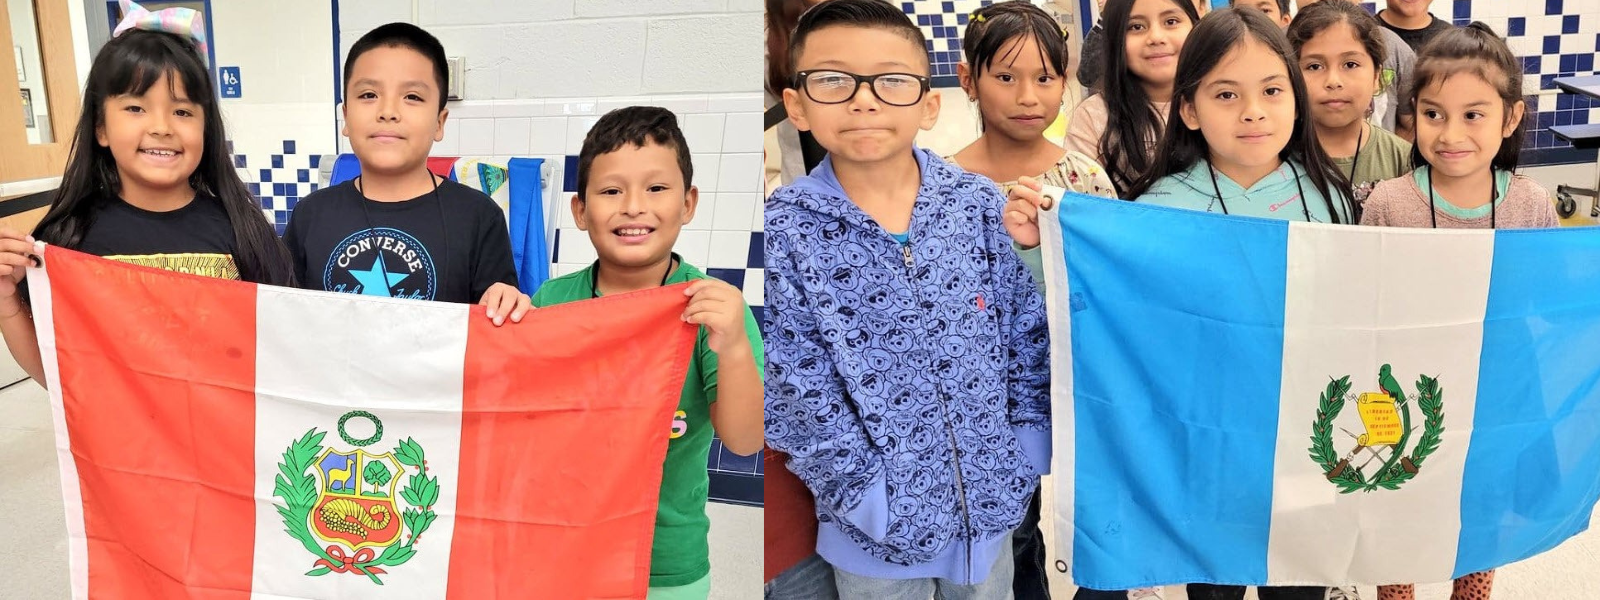 Students from Braddock Elementary School show the flag of Peru on the left and the flag of Guatemala on the right.